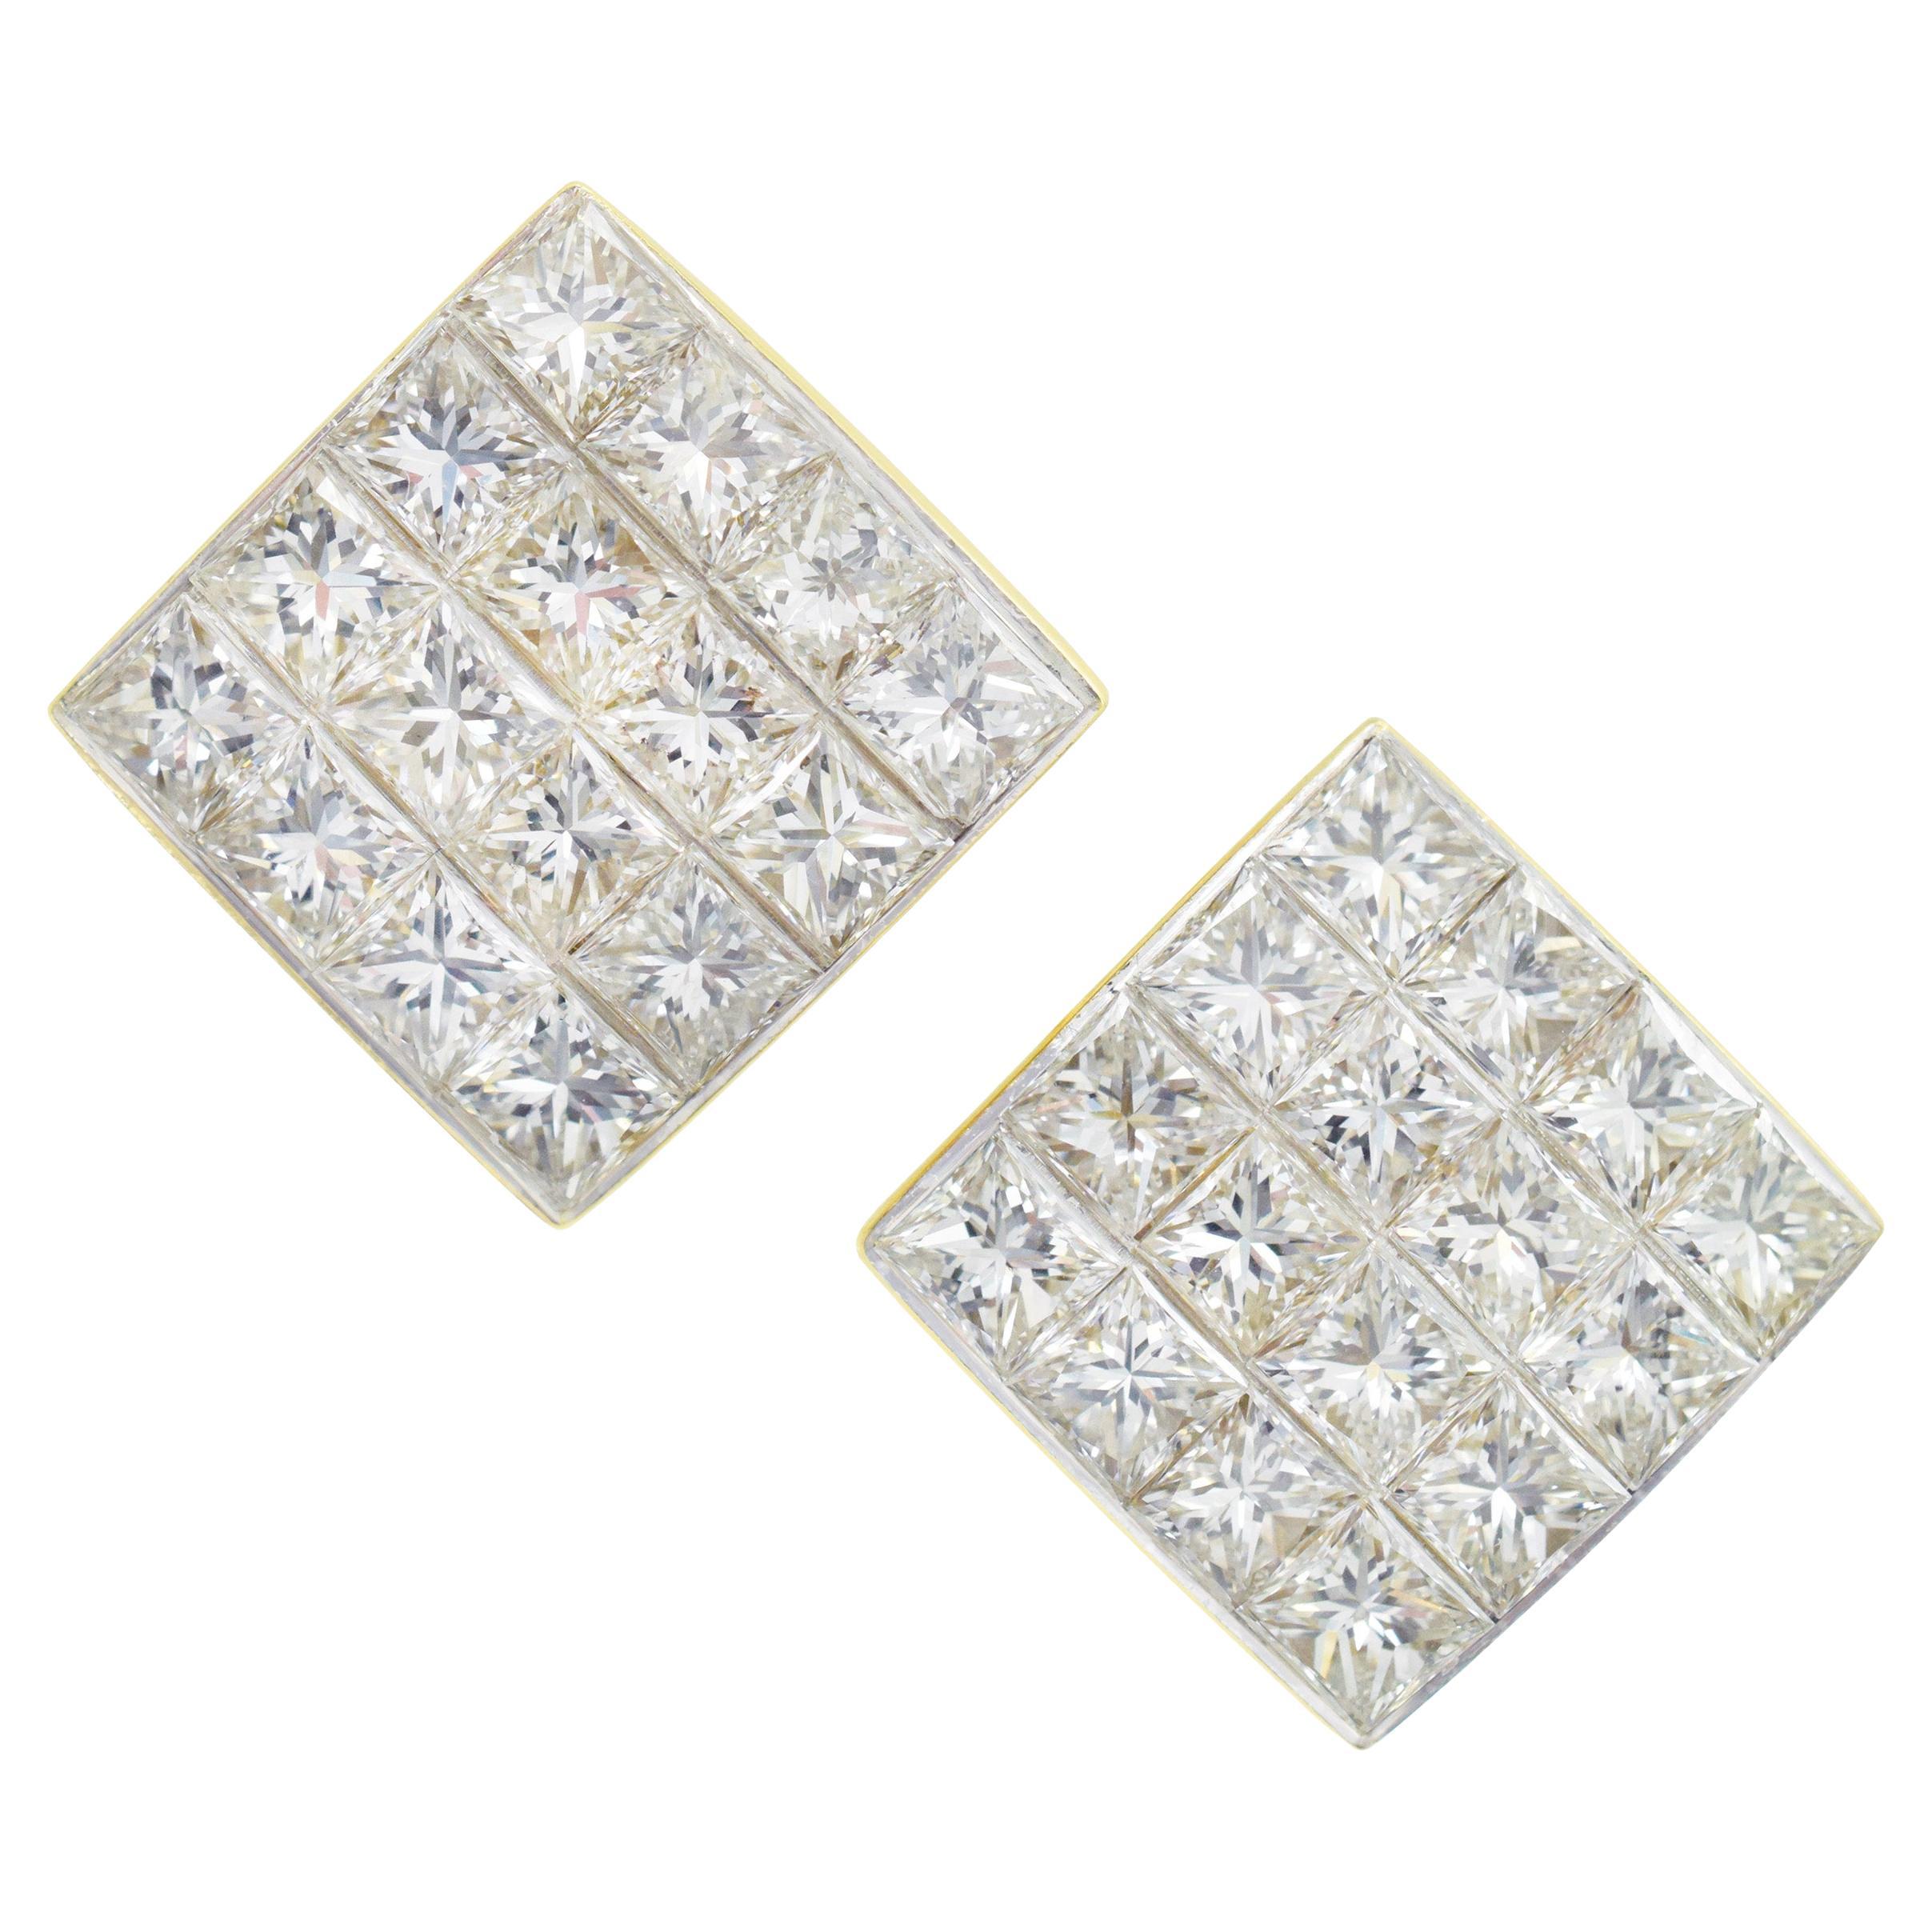 Tiffany & Co. Invisible set diamond earrings in 18k yellow gold. The earrings feature
square design, invisibly set with 32 princess cut diamonds with total weight of approximately 6.5ct, color F-G, clarity VSSI. Crafted in 18k yellow gold. Equipped